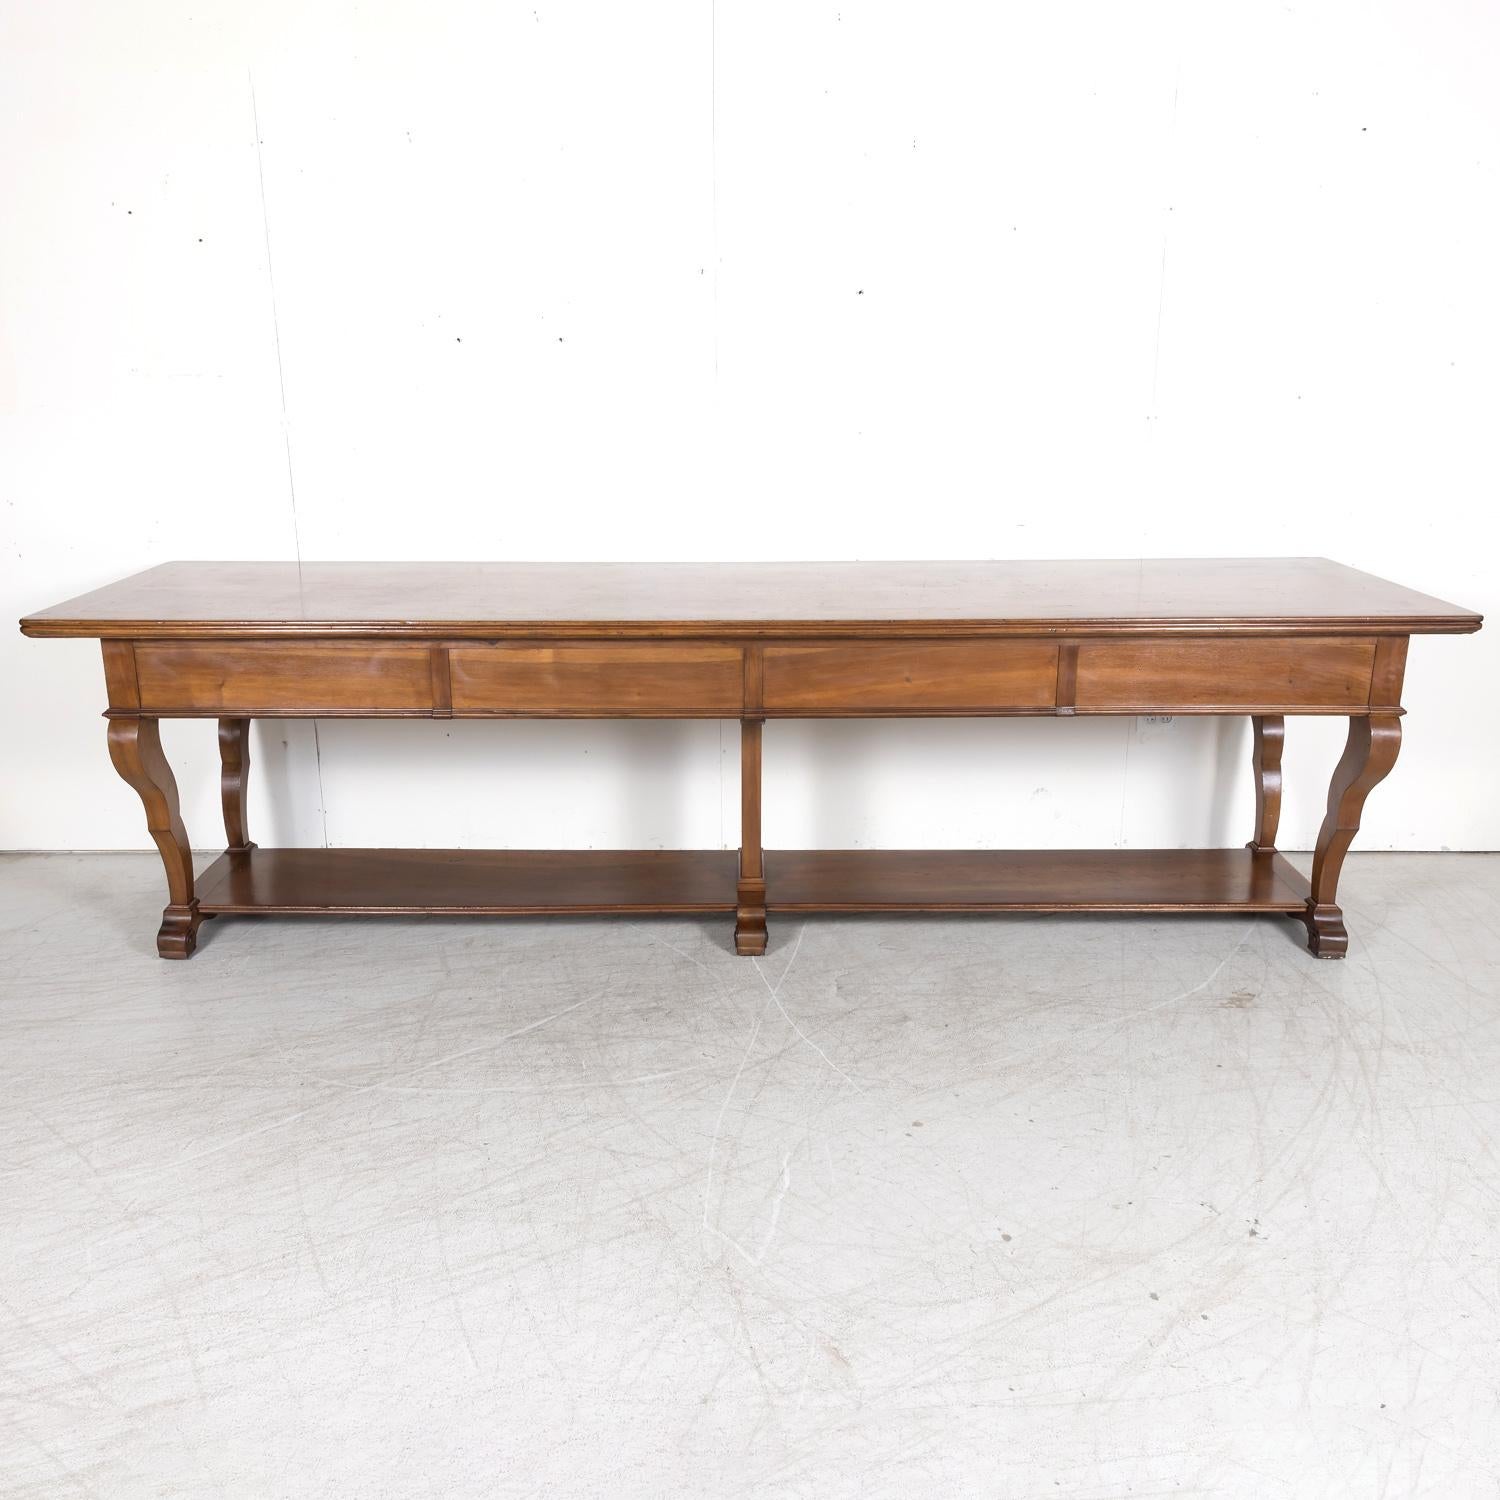 18th Century French Directoire Period Walnut Draper's Table with Marquetry Band For Sale 14